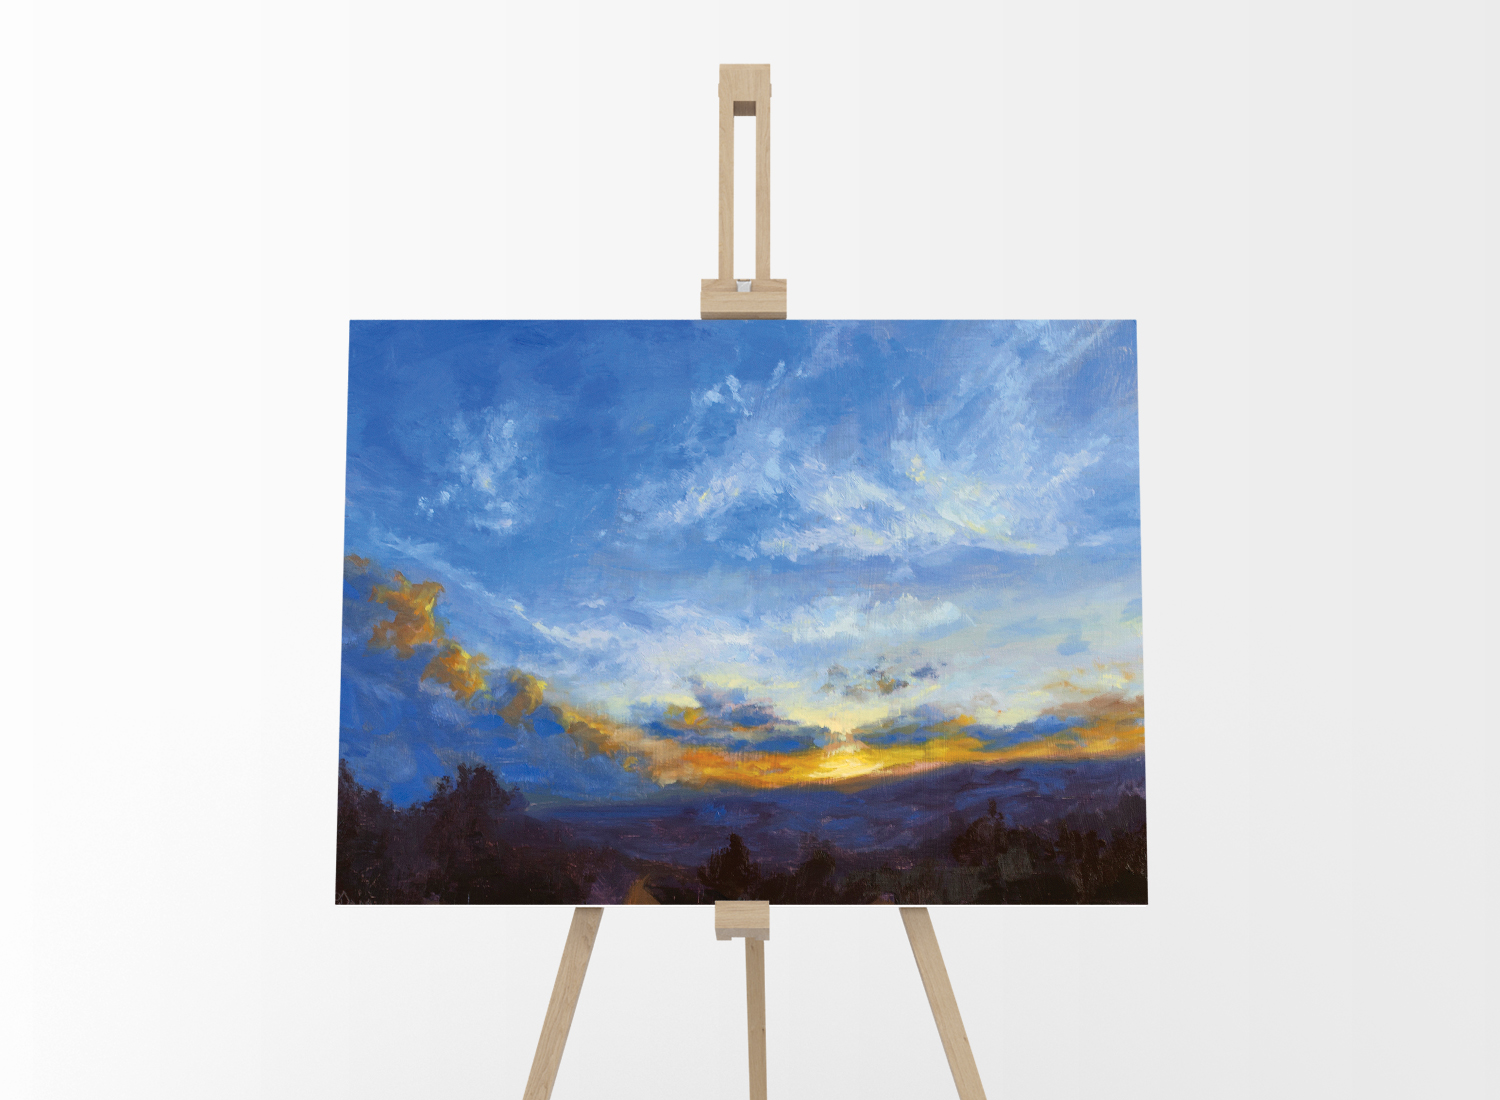 Rising Clouds Oil Painting Landscape on Easel Andrew Gaia